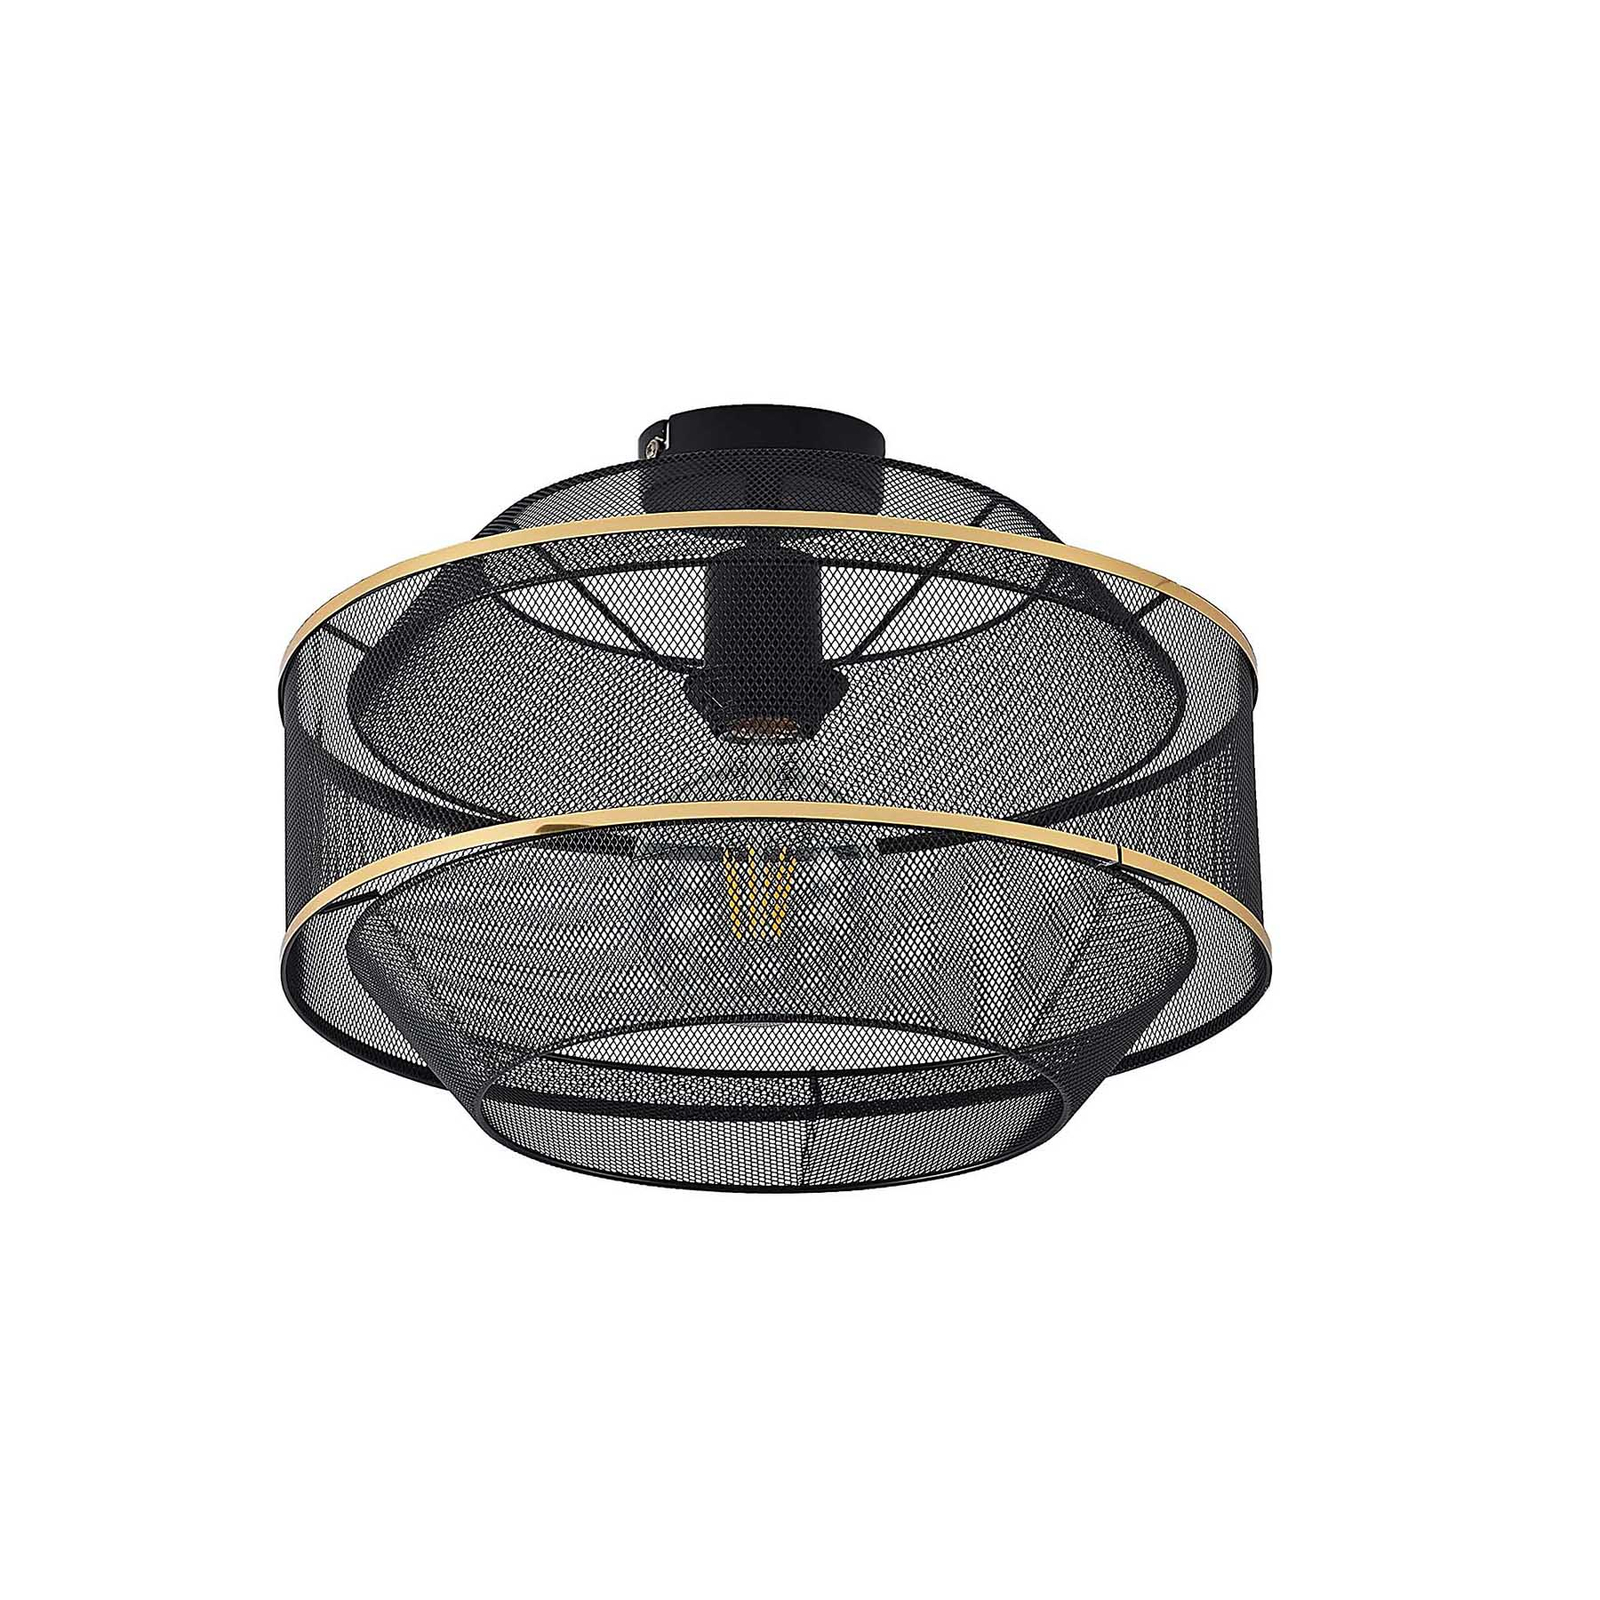 Lindby Dionta, cage ceiling light, black